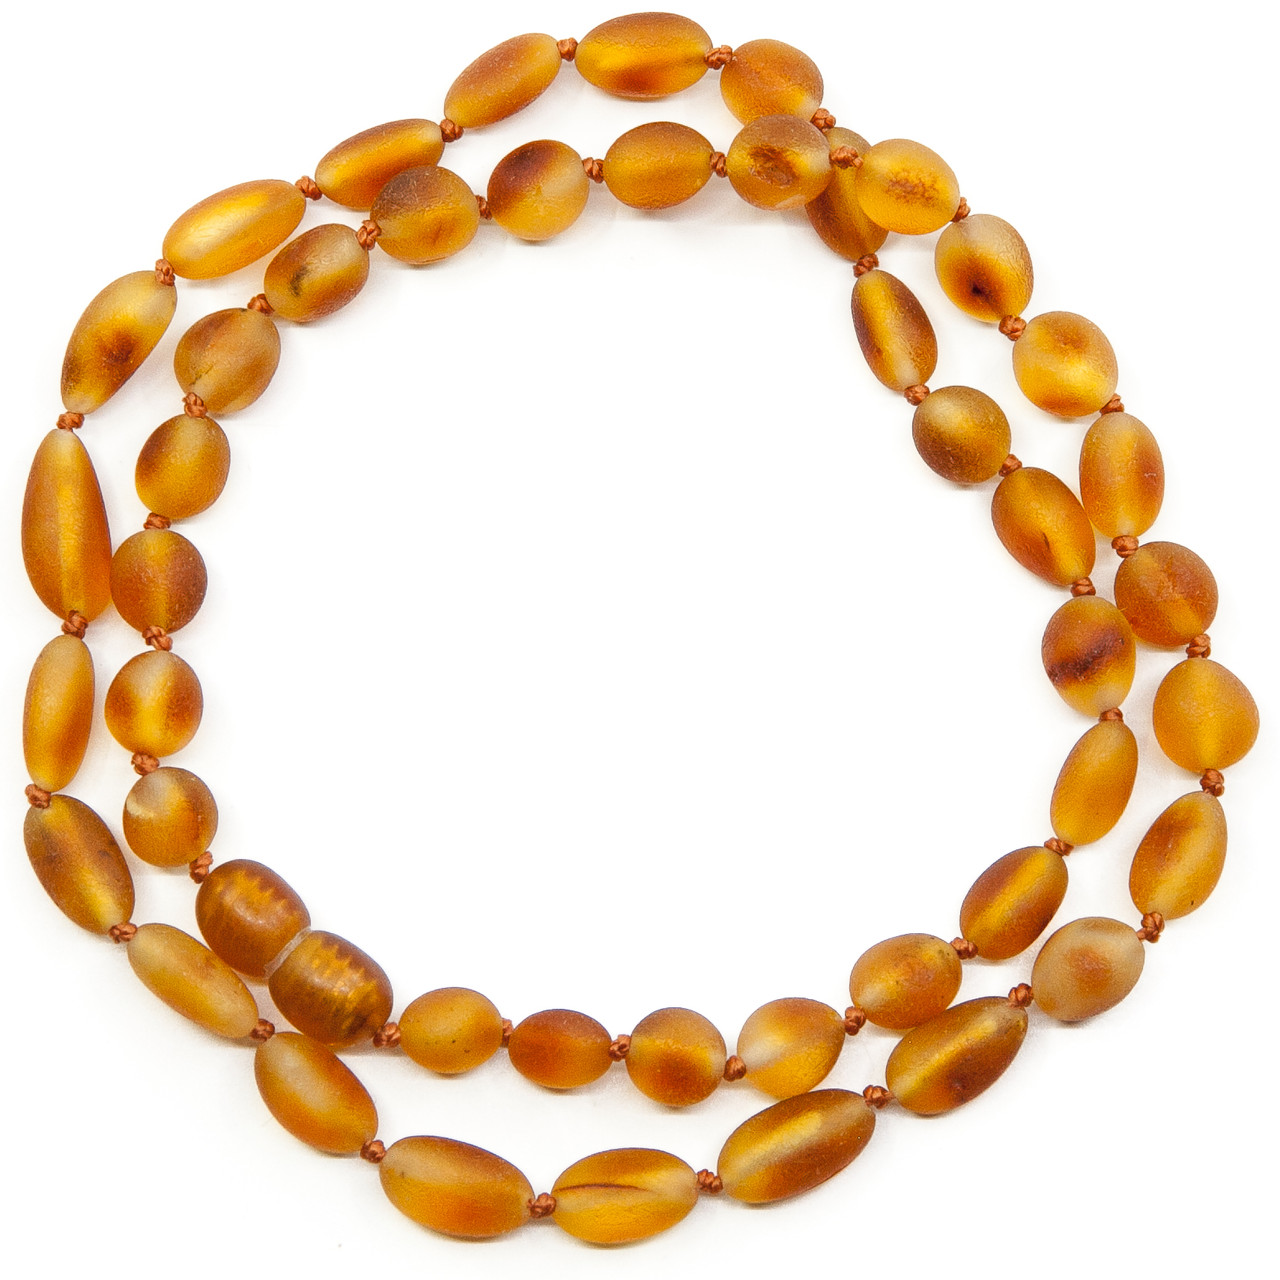 Baltic Amber healing necklace